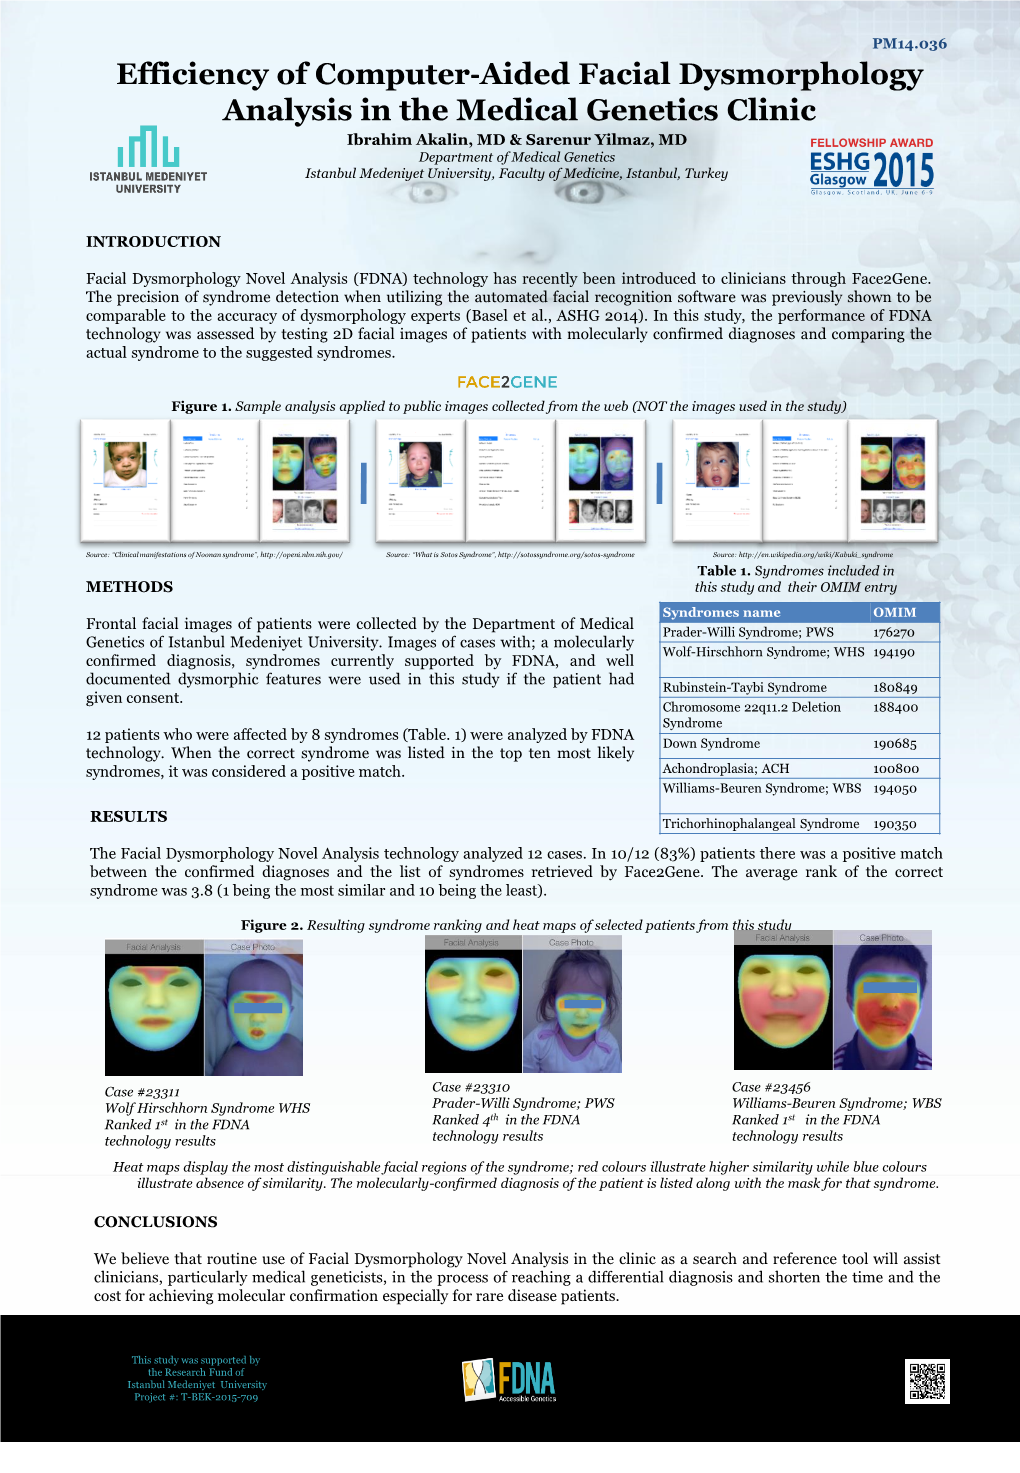 Efficiency of Computer‐Aided Facial Dysmorphology Analysis in The